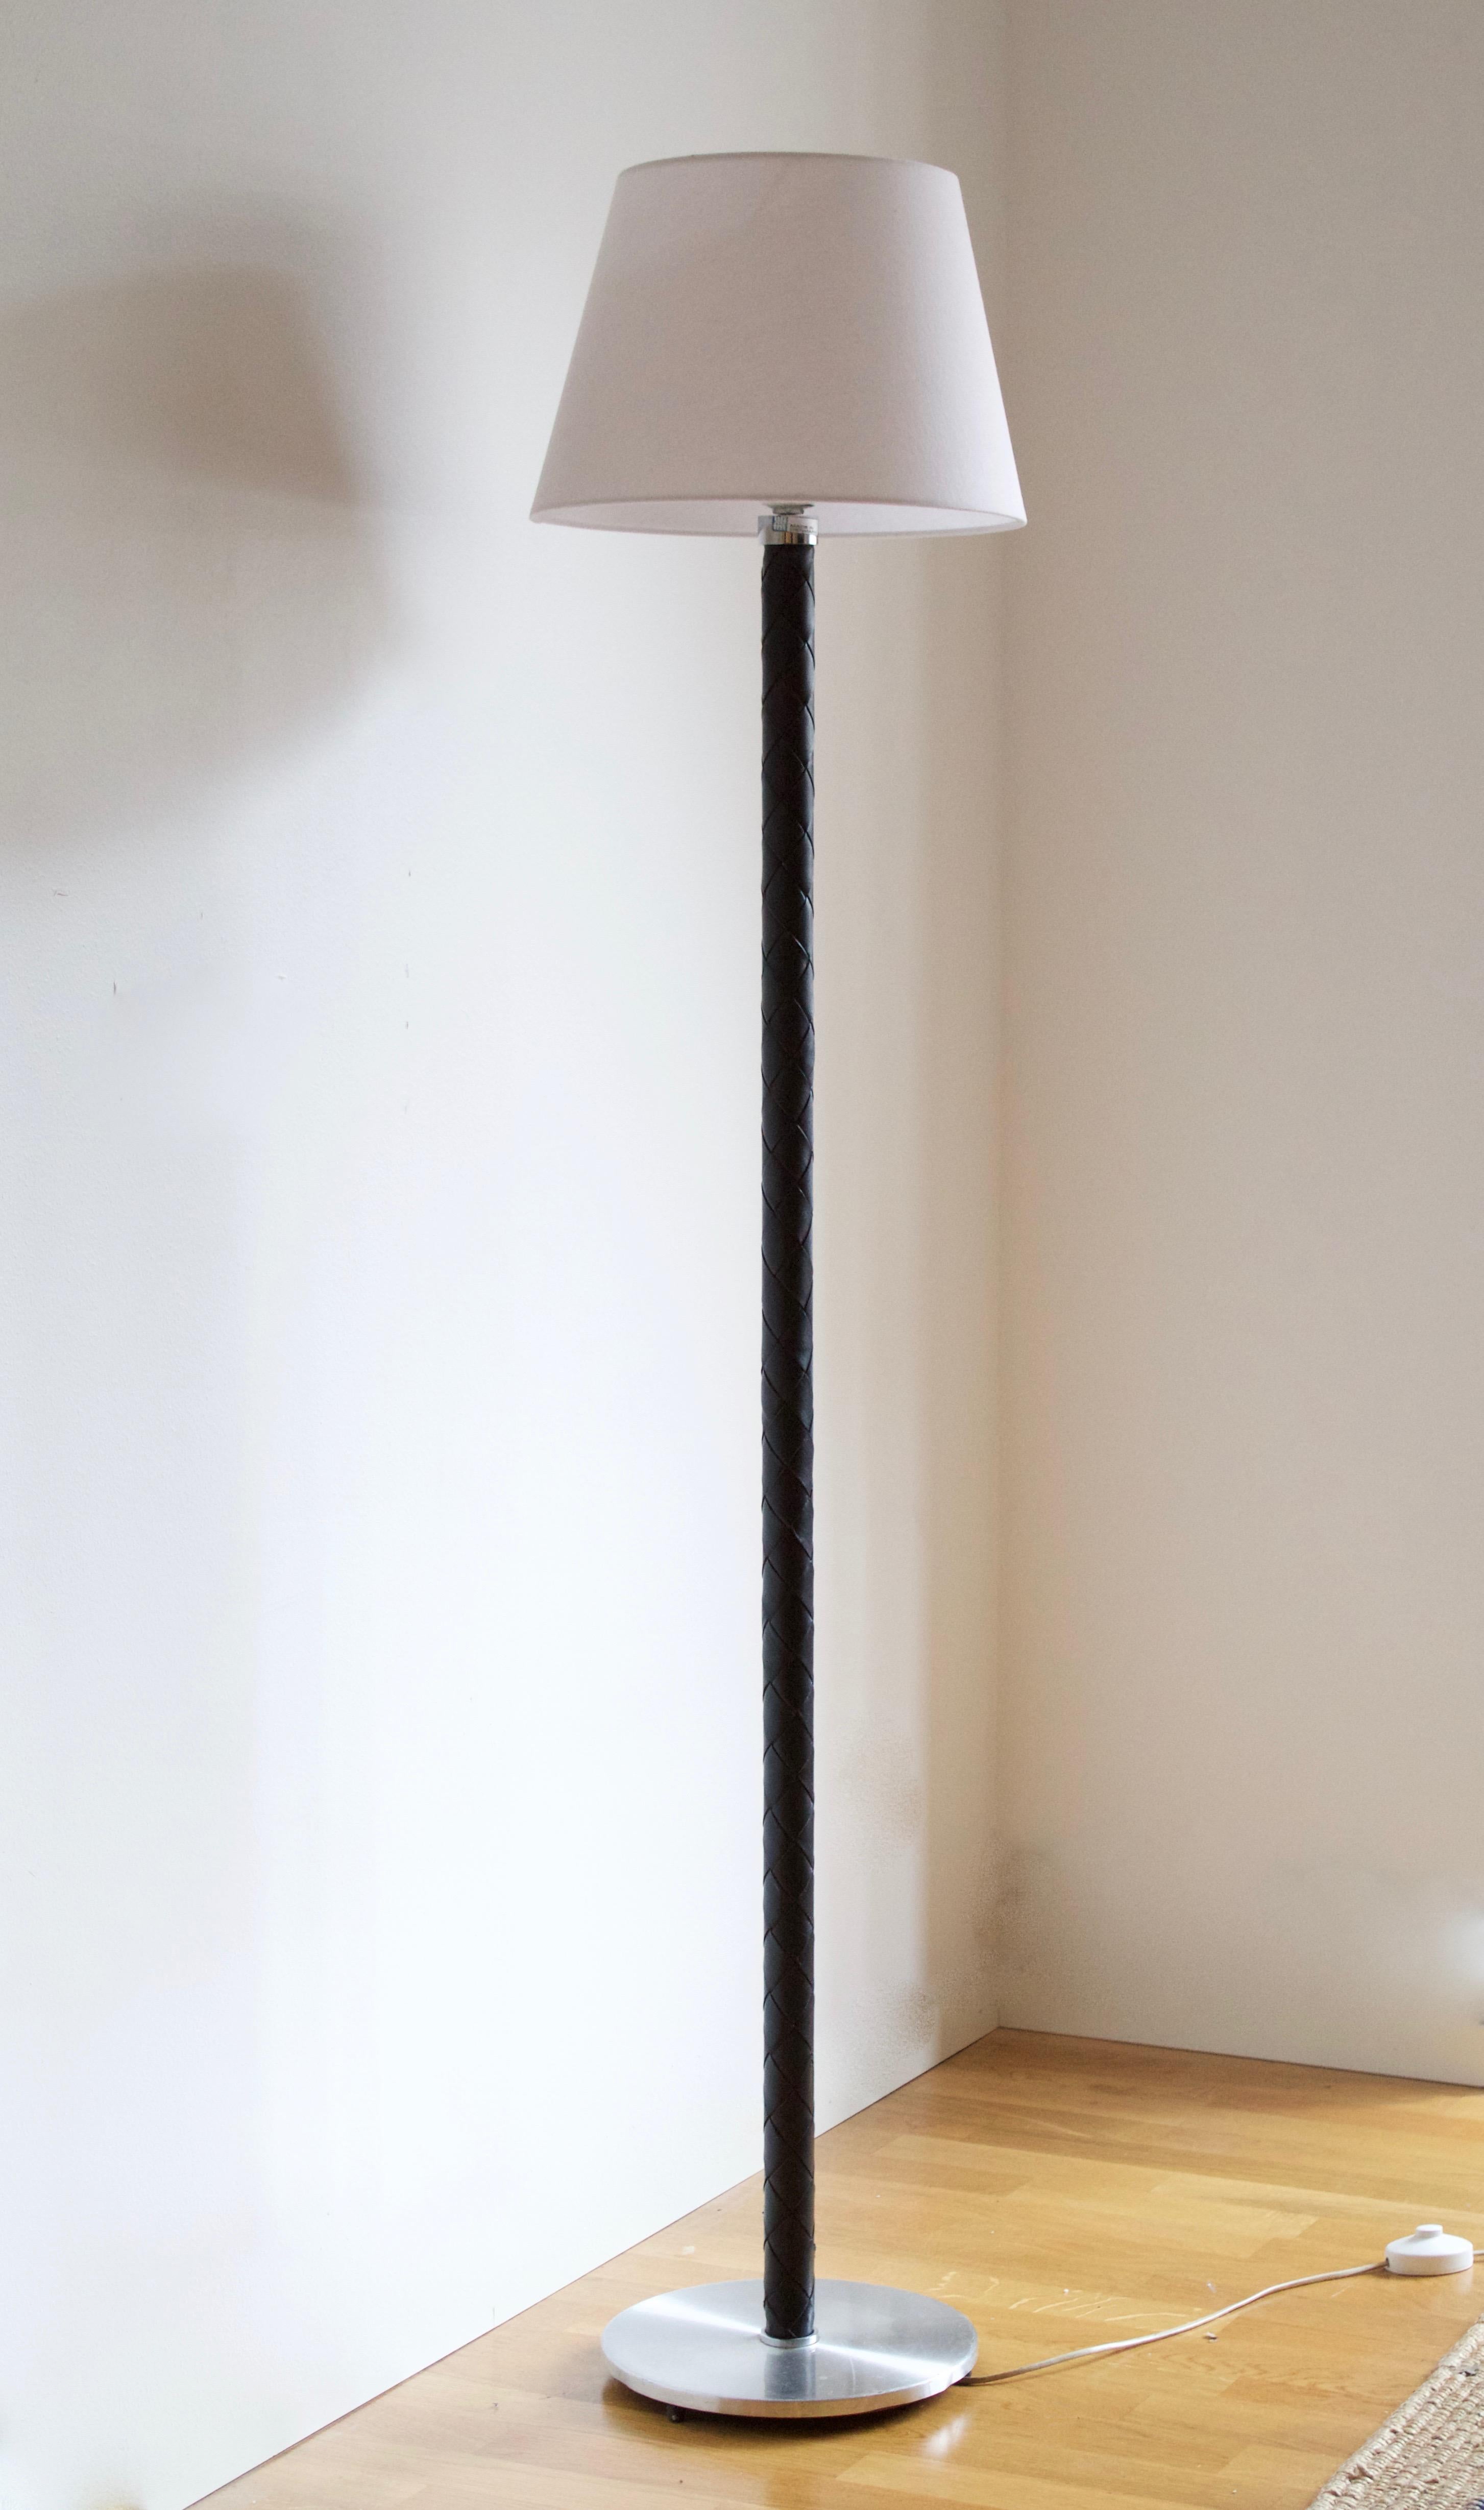 A Danish modernist floor lamp designed by Jo Hammerborg for Fog & Mørup. Base of stainless steel, rod covered in braided black dyed leather. Labeled

Stated dimensions exclude lampshade. Height includes the harp. Sold without